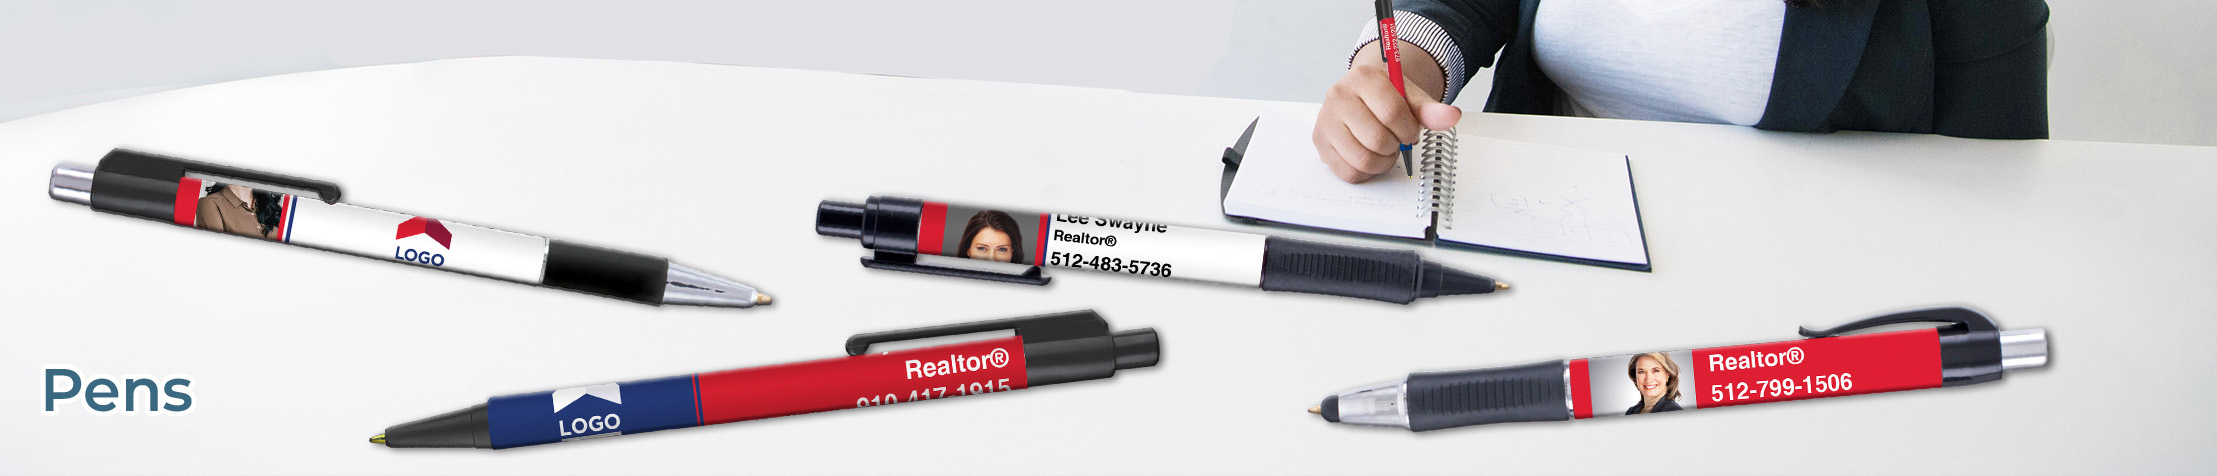 ERA Real Estate Personalized Pens - promotional products: Grip Write Pens, Colorama Pens, Vision Touch Pens, and Colorama Grip Pens | BestPrintBuy.com